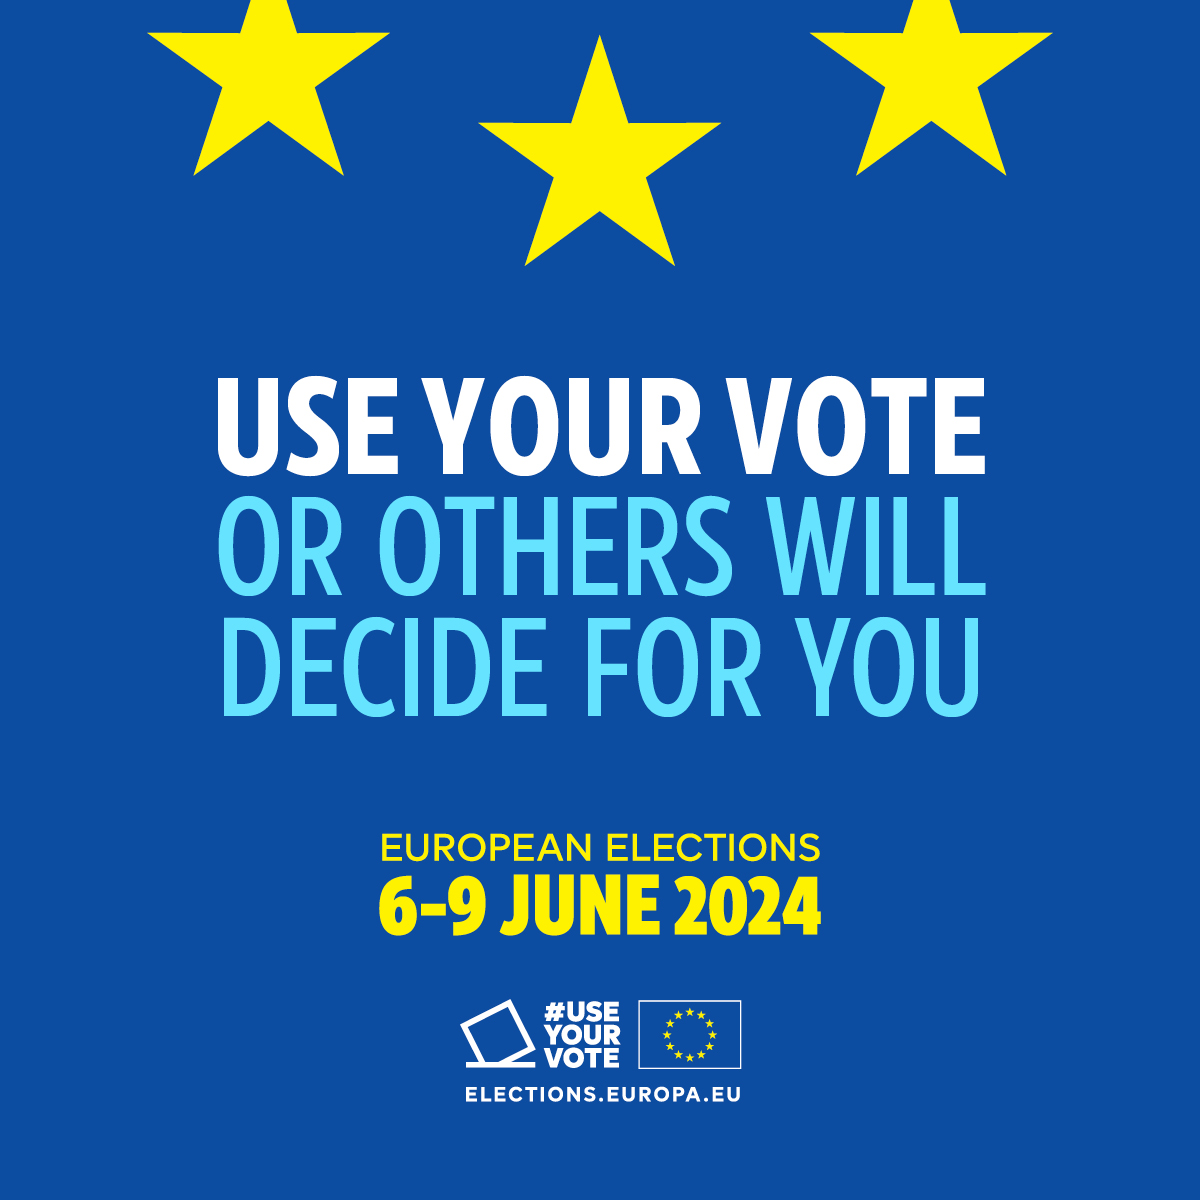 European Elections image - yellow stars on blue background